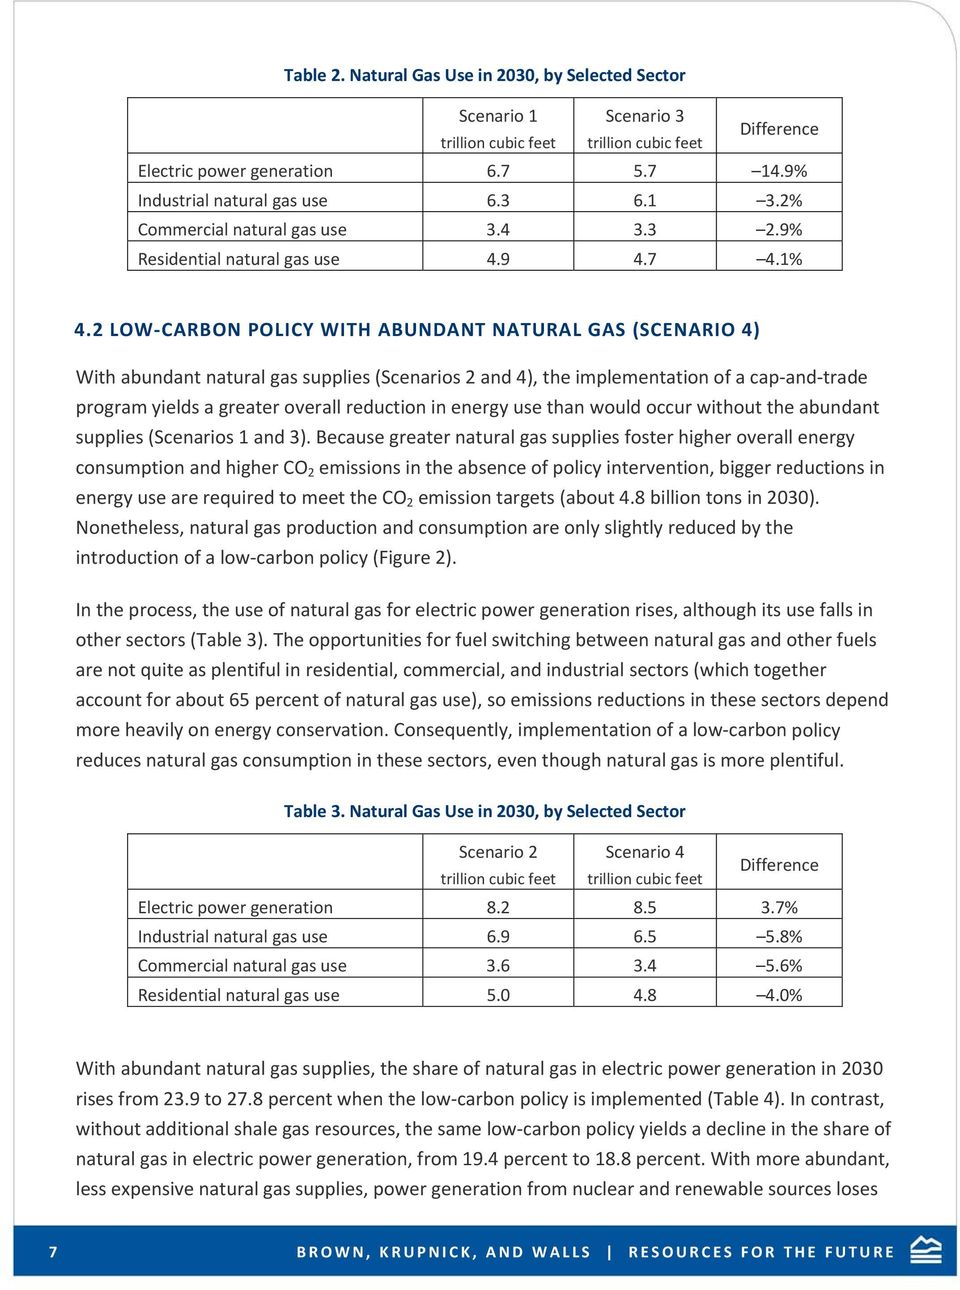 2 LOW CARBON POLICY WITH ABUNDANT NATURAL GAS (SCENARIO 4) With abundant natural gas supplies (Scenarios 2 and 4), the implementation of a cap and trade program yields a greater overall reduction in